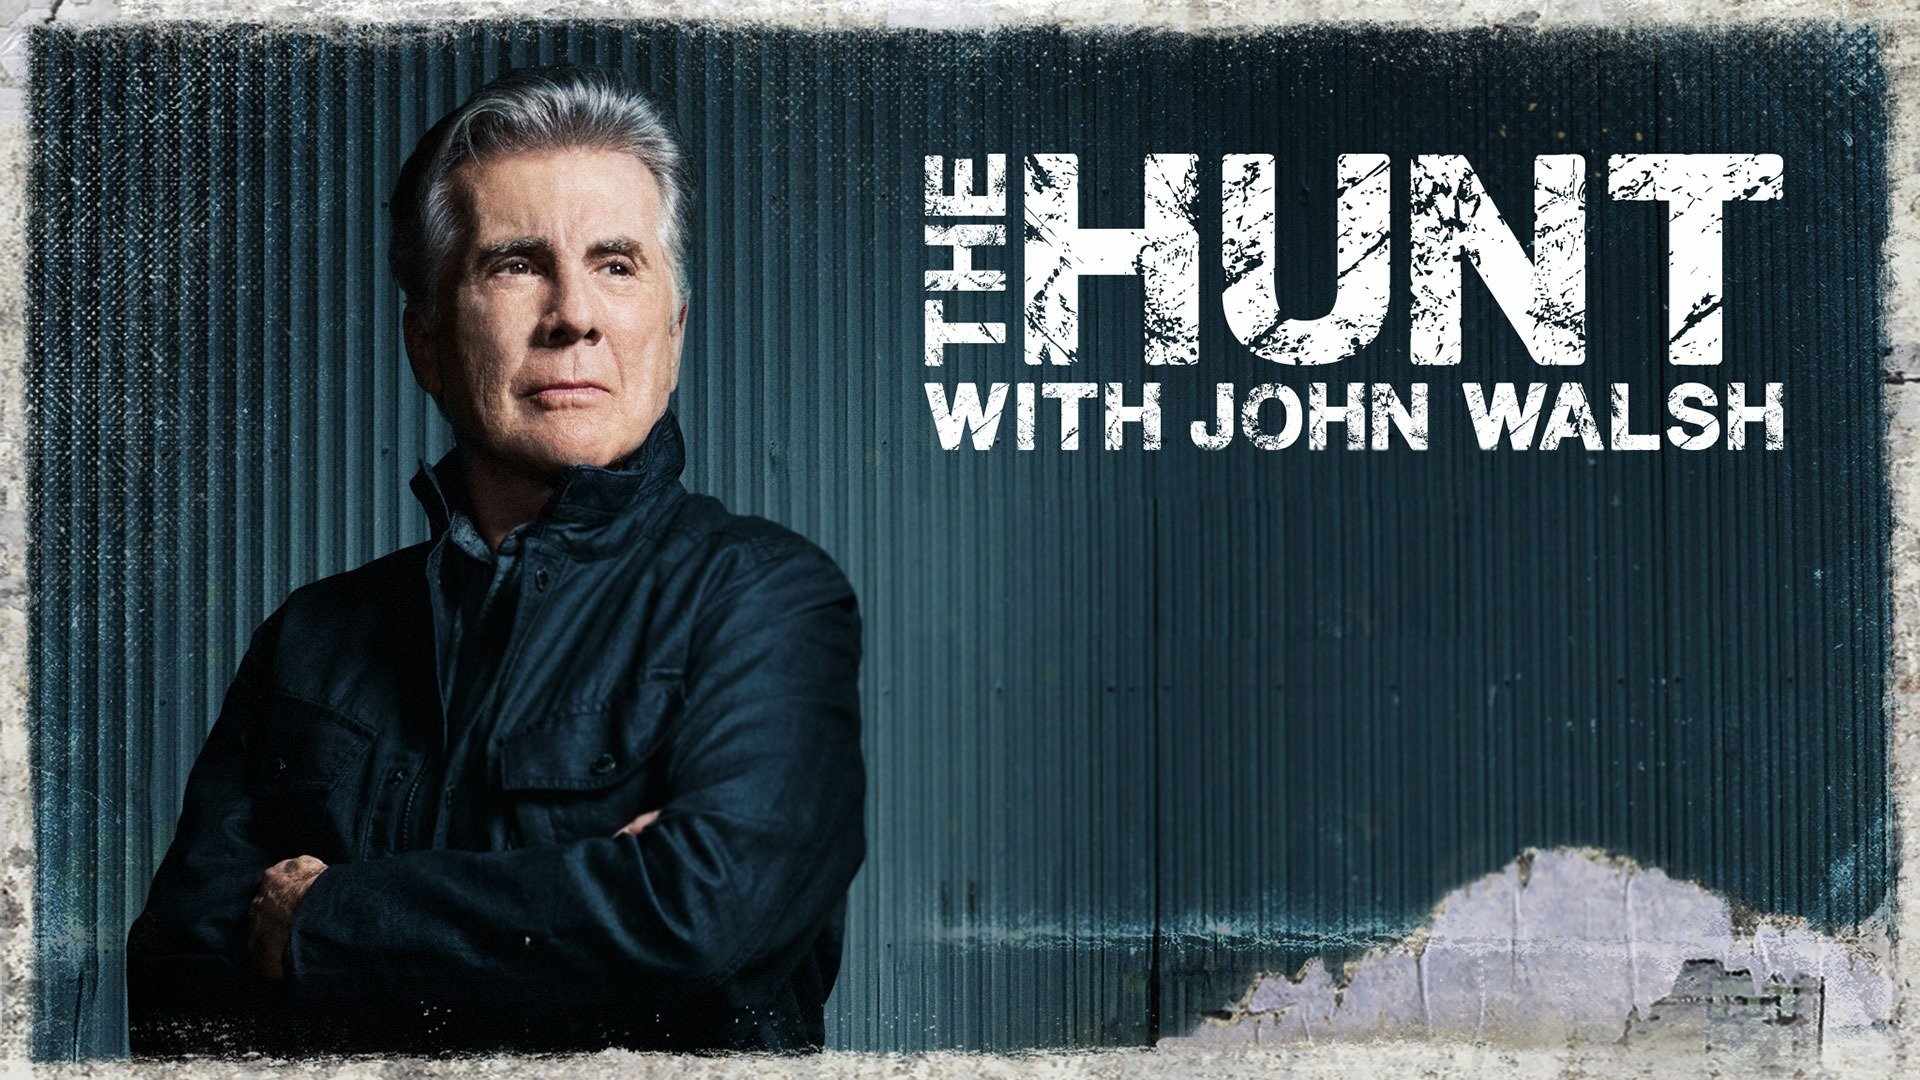 When Does The Hunt with John Walsh Season 5 Start? HLN Release Date